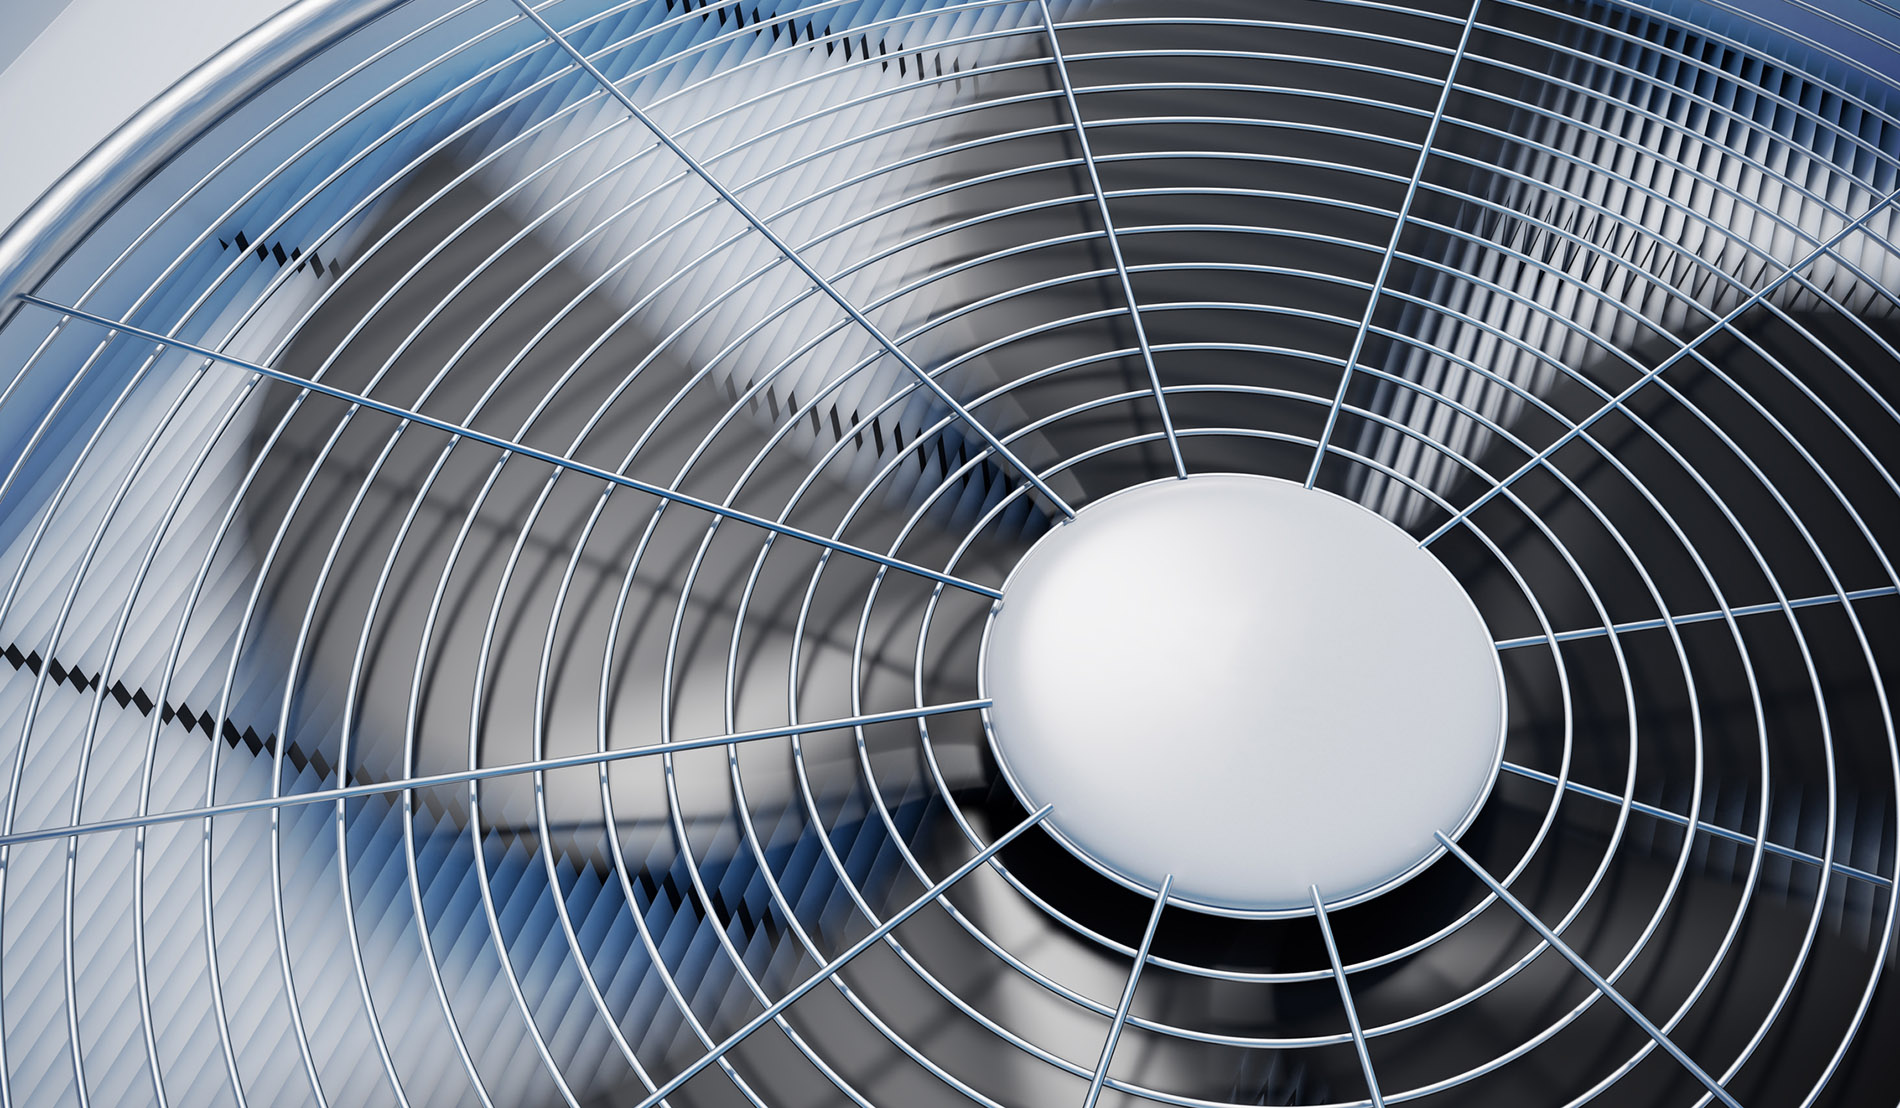 Close up view on HVAC units (heating, ventilation and air conditioning).